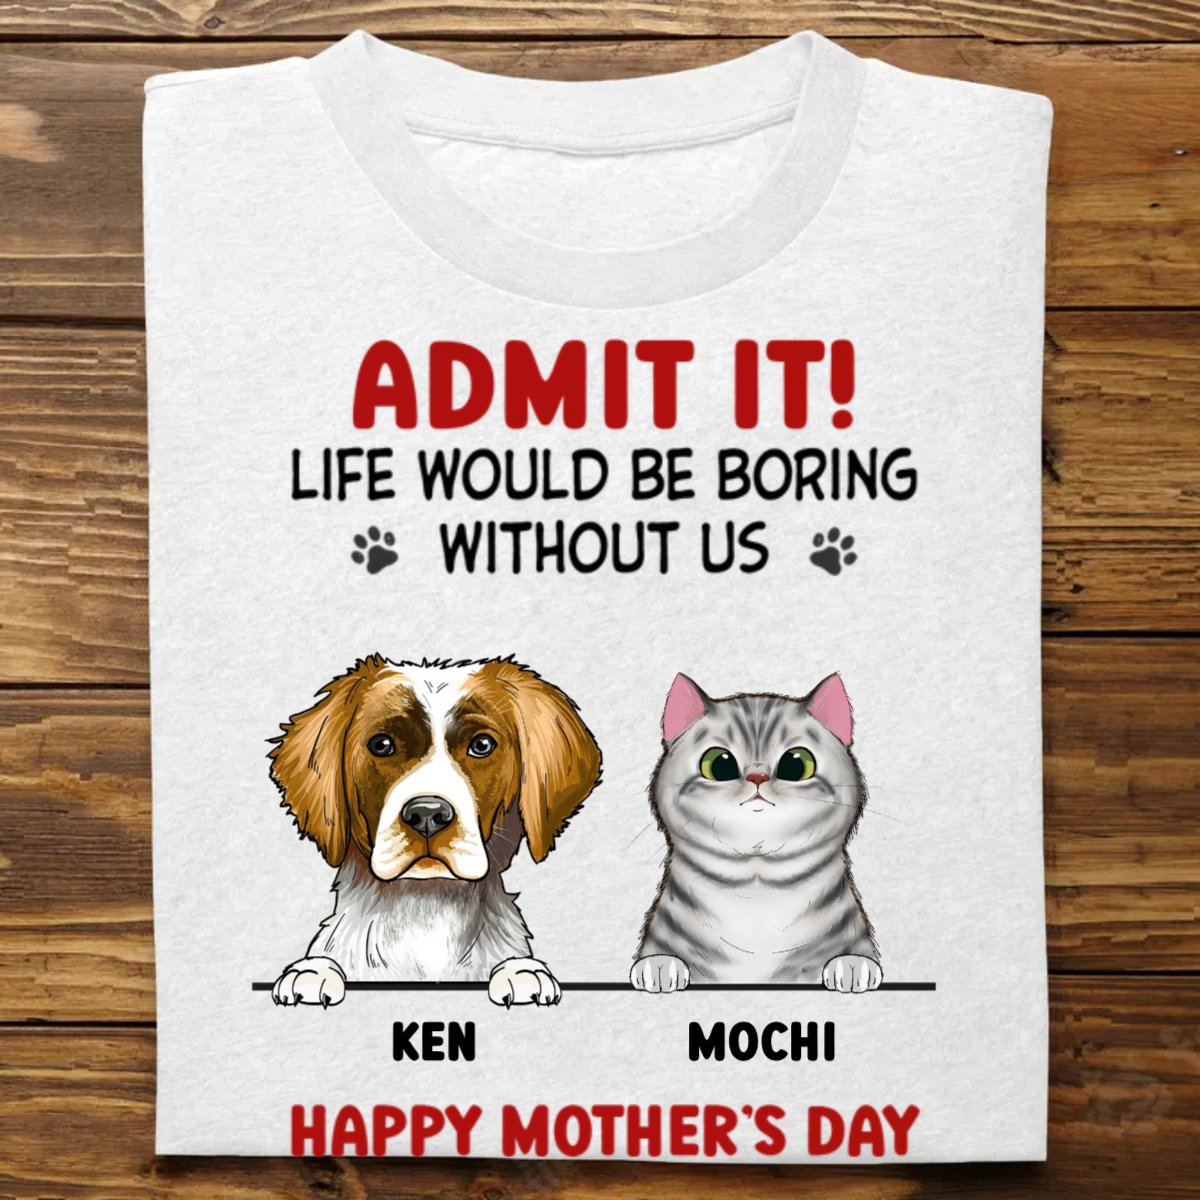 Pet Lovers - Admit It! Life Would Be Boring Without Us - Personalized T-Shirt